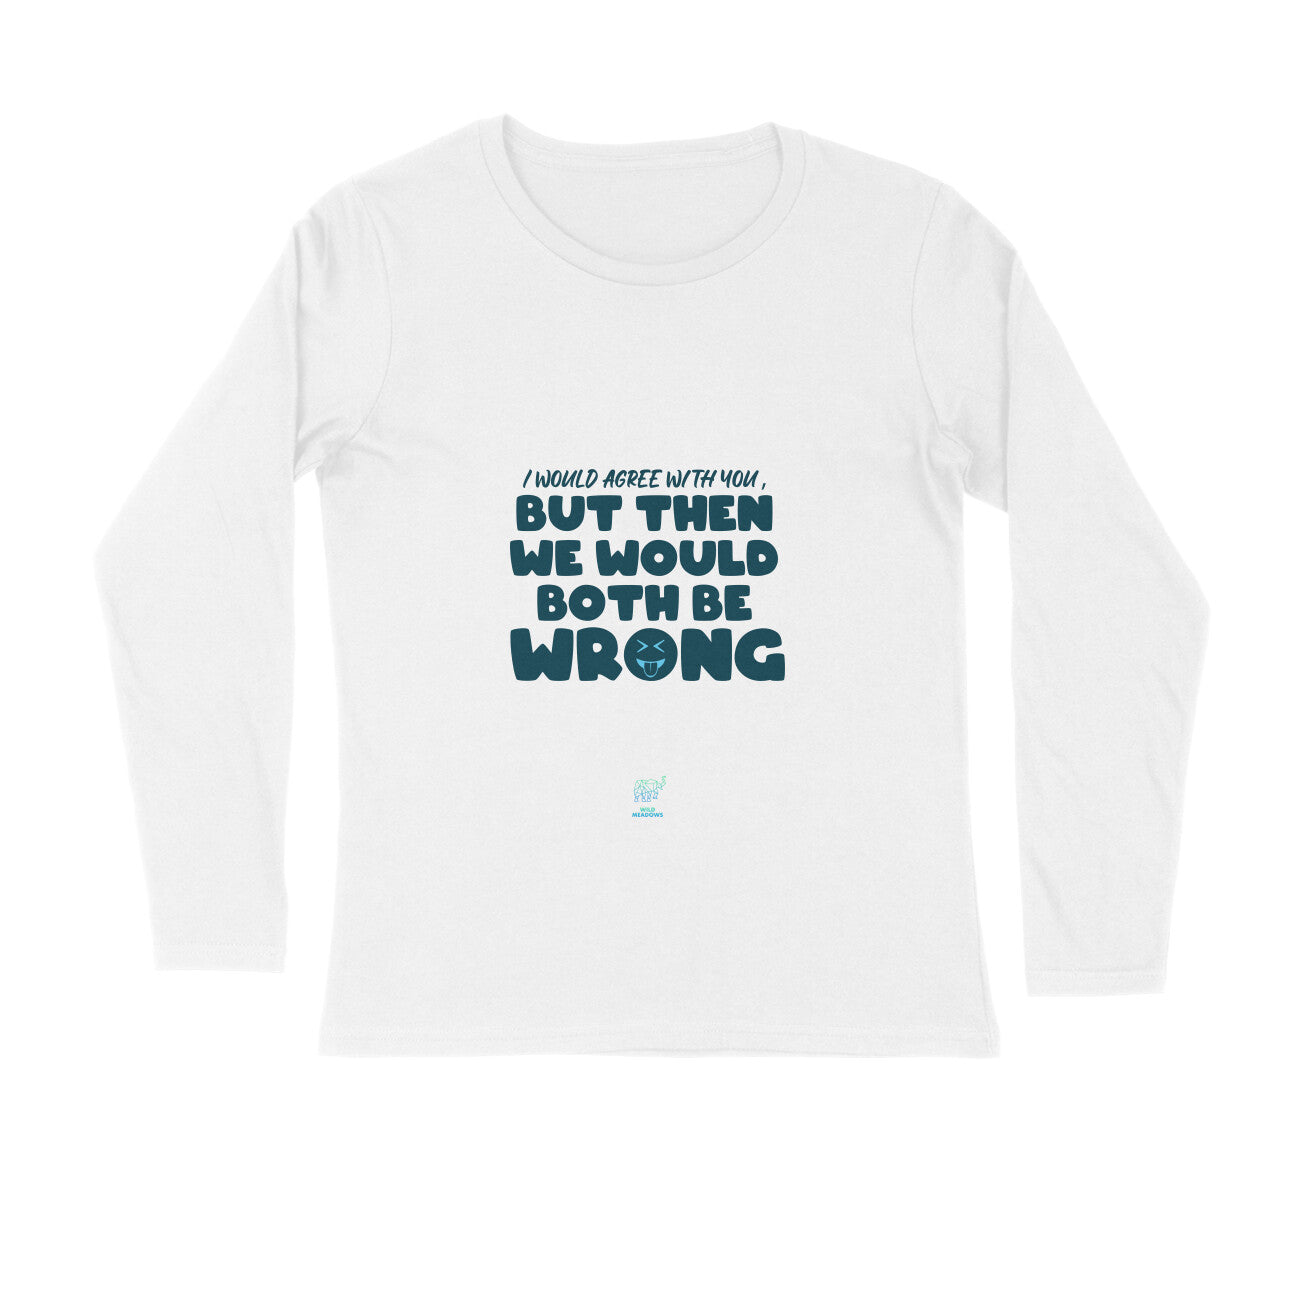 We Both will be wrong - Long Sleeve Unisex Round neck Tee